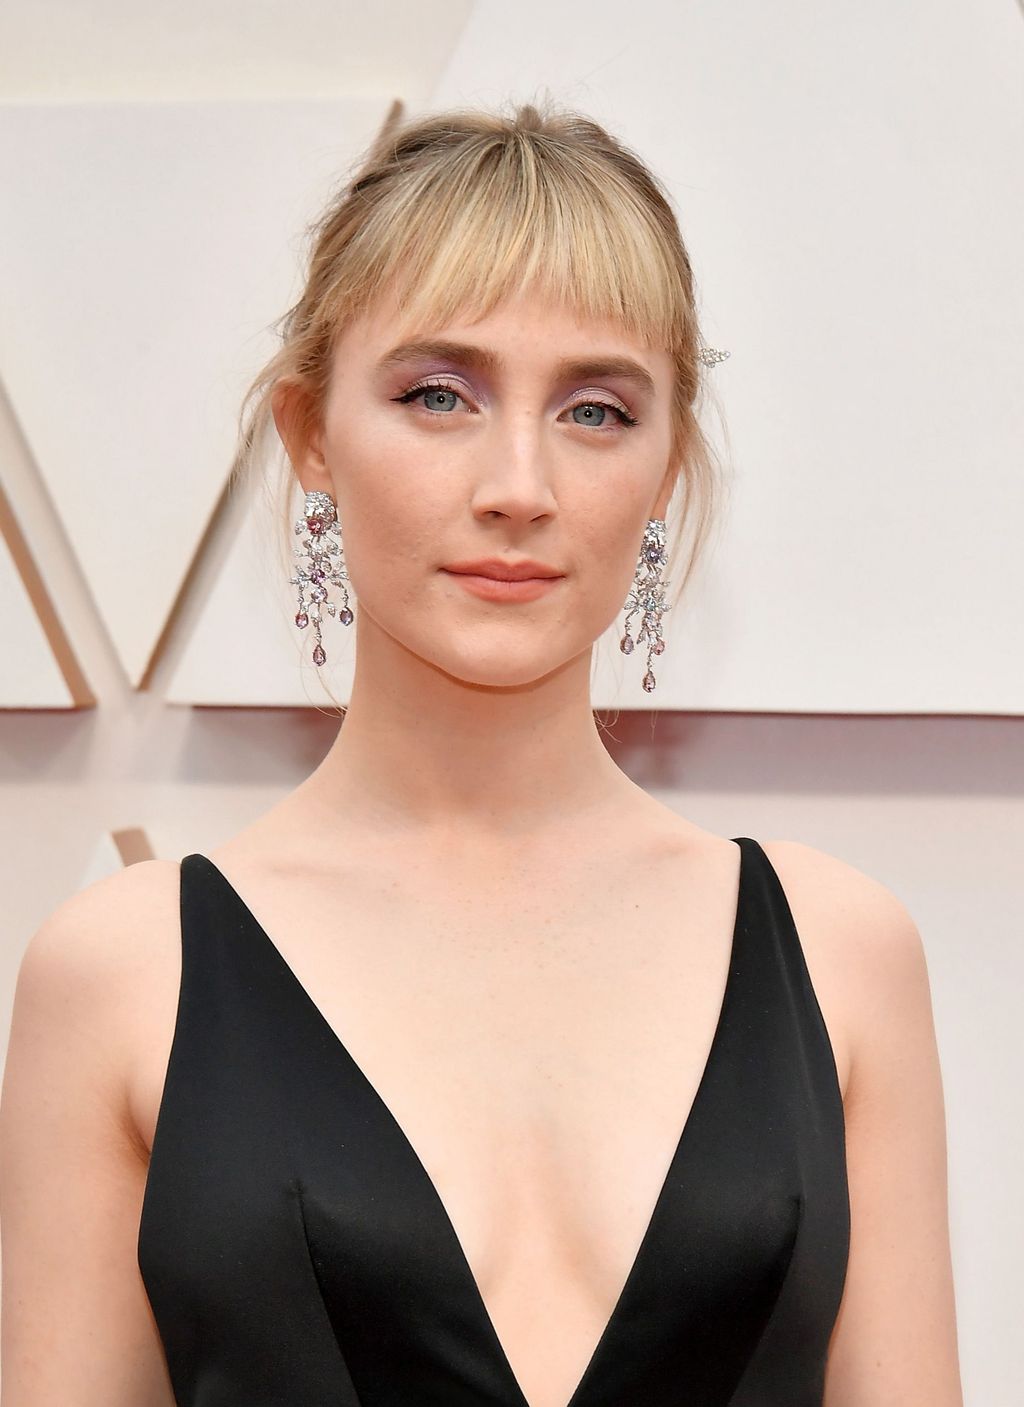 HOLLYWOOD, CALIFORNIA - FEBRUARY 09: Saoirse Ronan attends the 92nd Annual Academy Awards at Hollywood and Highland on February 09, 2020 in Hollywood, California. (Photo by Amy Sussman/Getty Images)